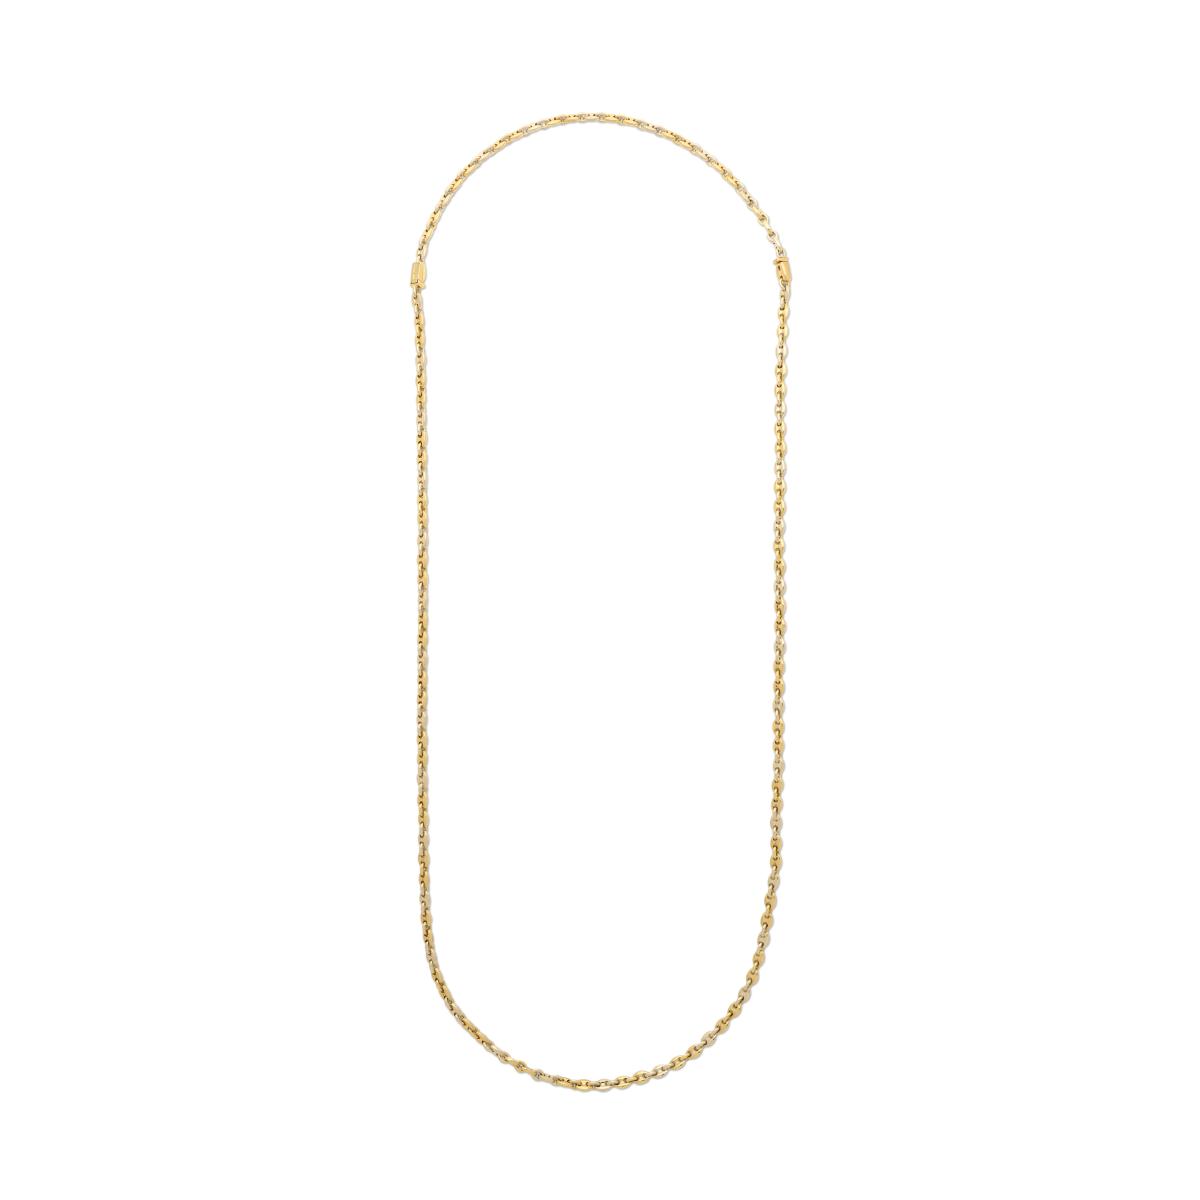 Cartier Two-Tone 18ct Gold Mariner Link Long Chain Necklace And Bracelet Circa 1990s